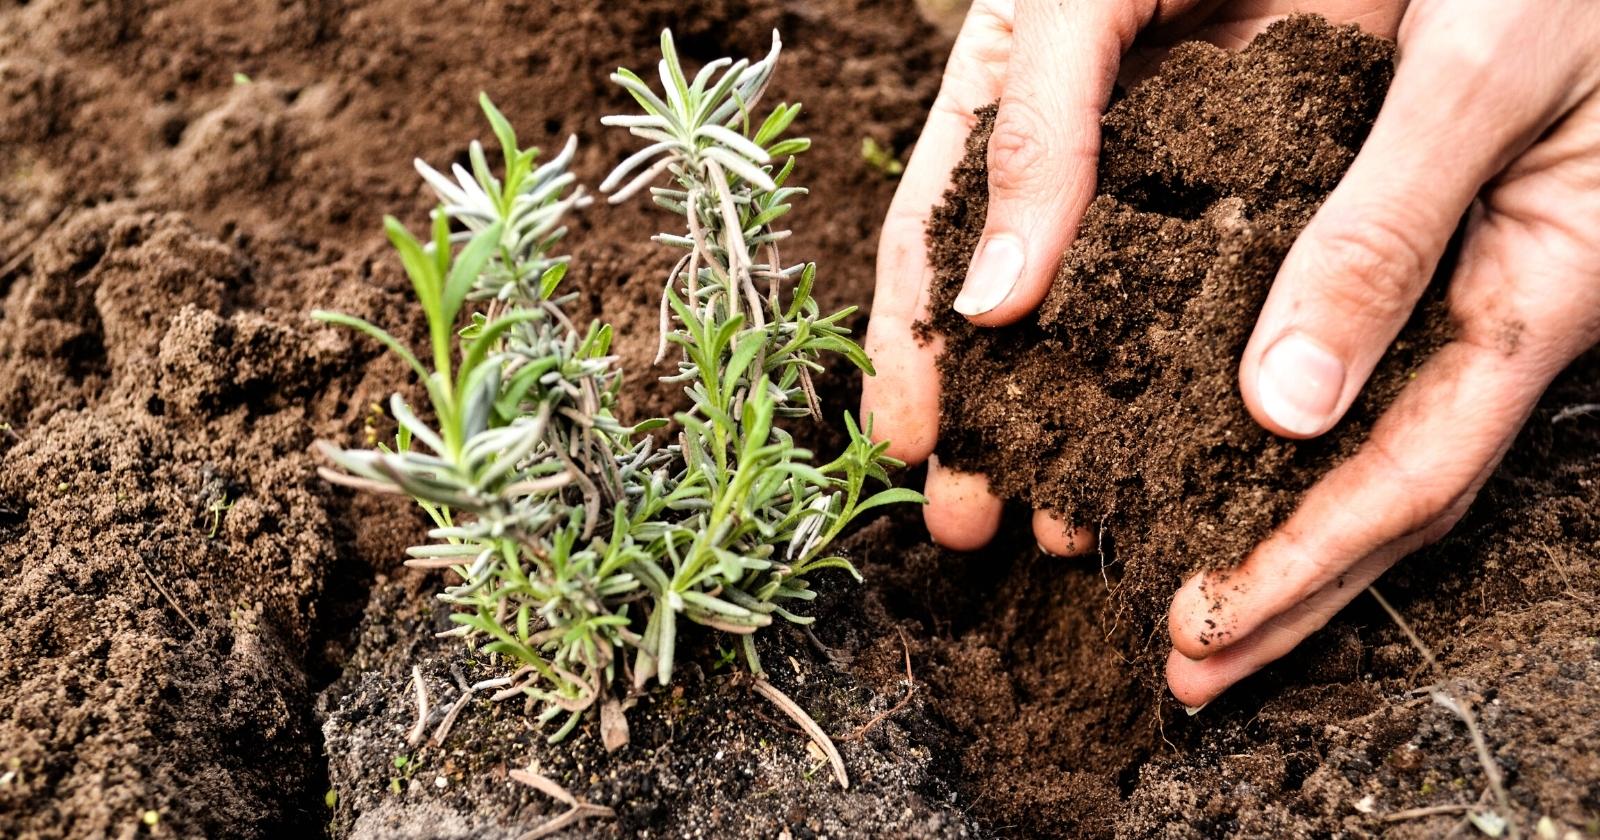 Hands holding dirt ready to fill in a freshly planted baby plant.